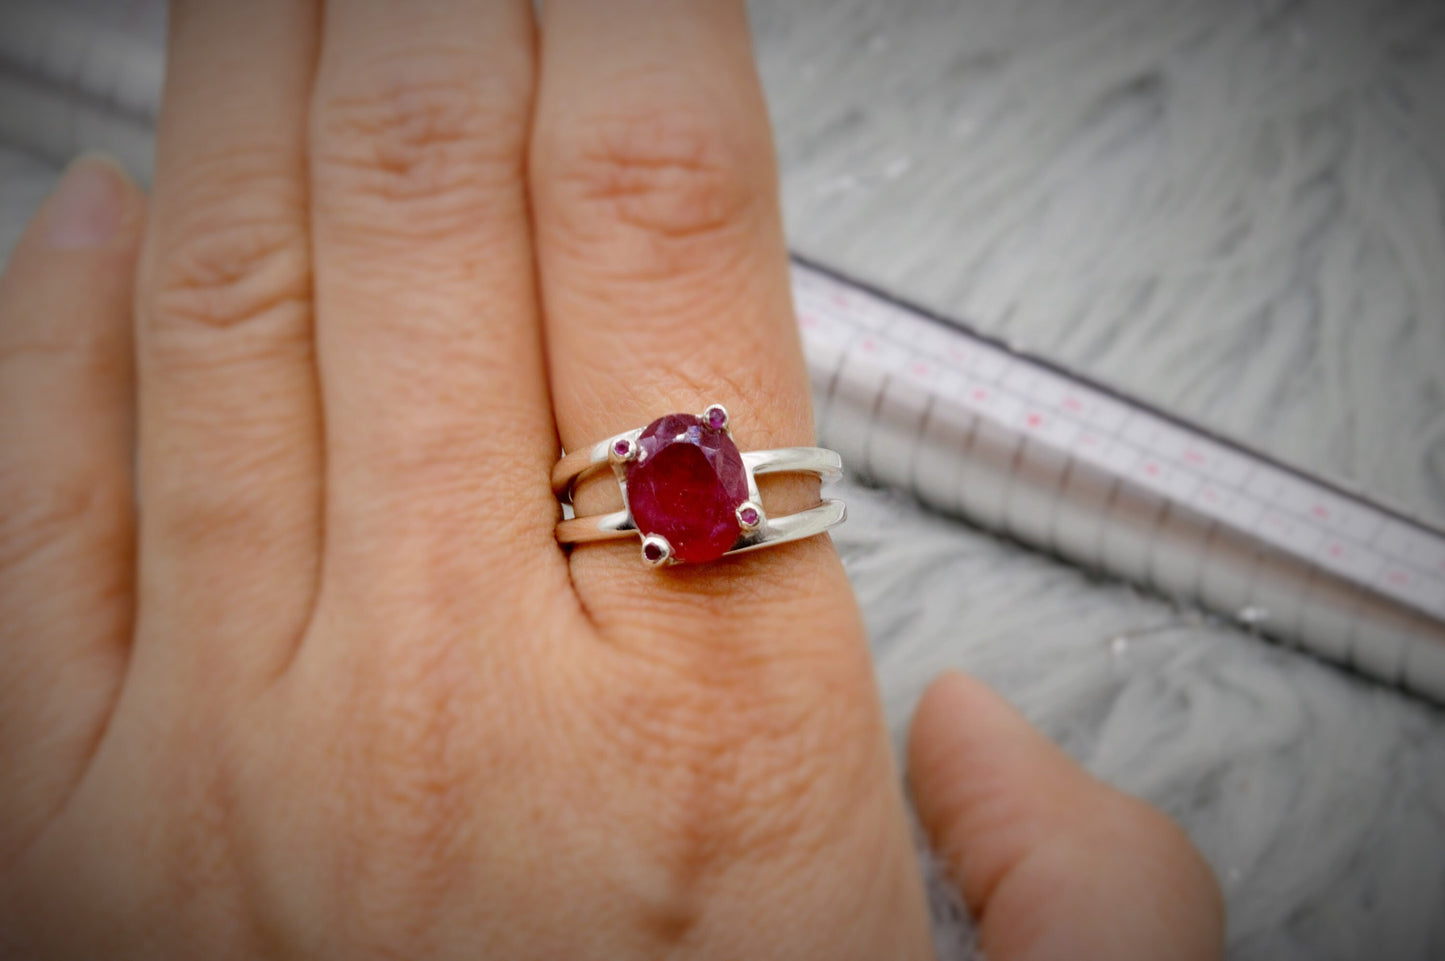 Red Ruby Ring, 925 Sterling Silver Ring, UK Size M, July Birthstone, Handmade Dainty Gemstone Ring, Birthday Gifts, Gift For Her